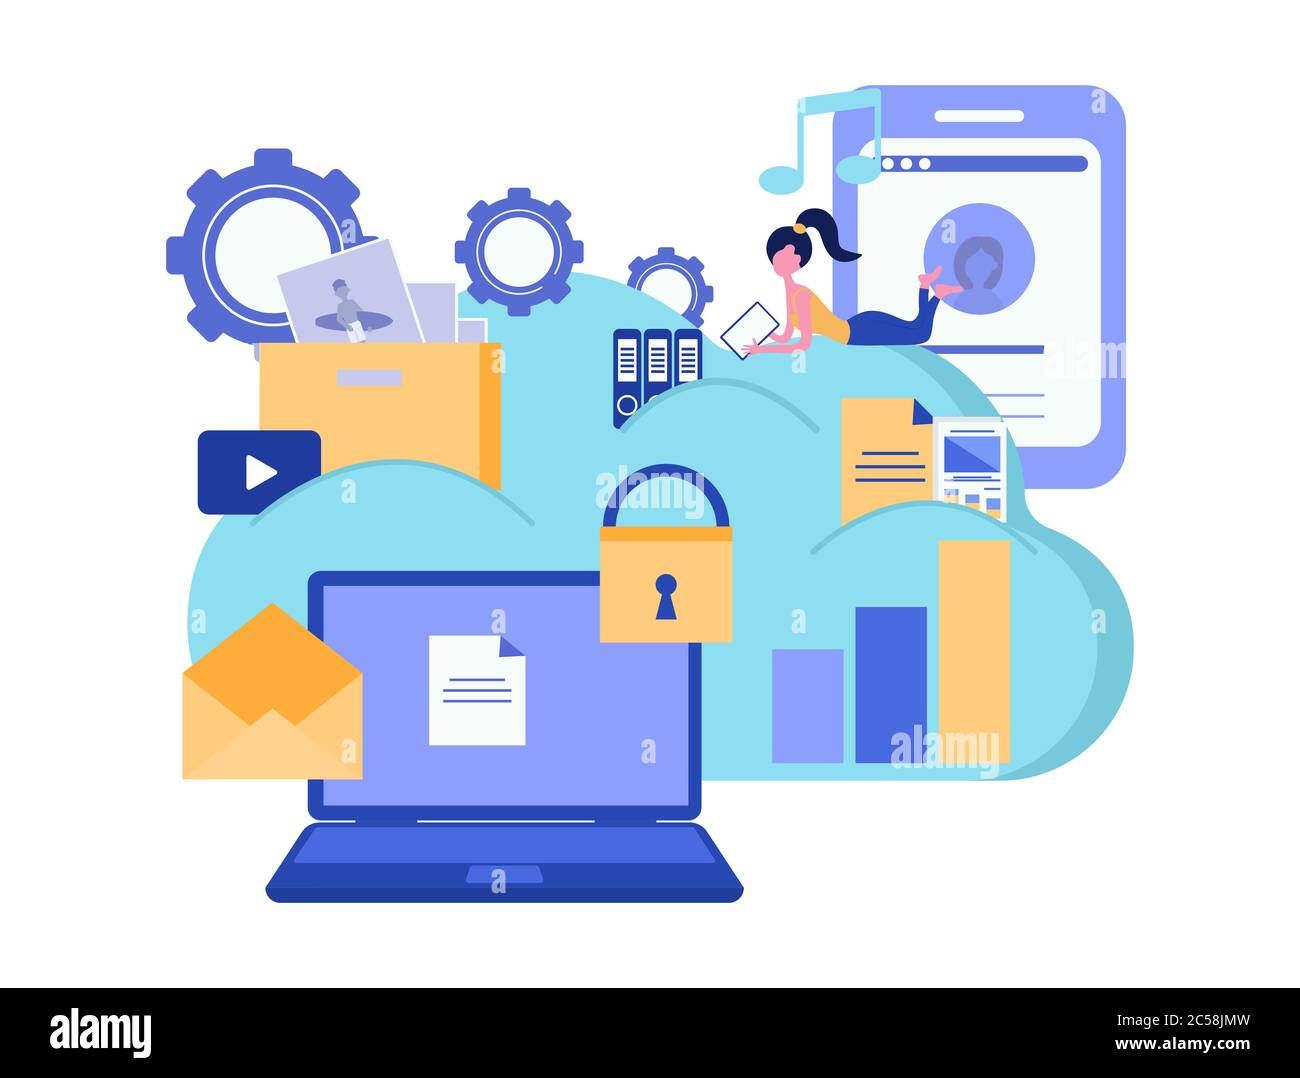 Cloud computing services and technology. Cloud storage. Data protection. Business concept. Vector illustration. Stock Vector